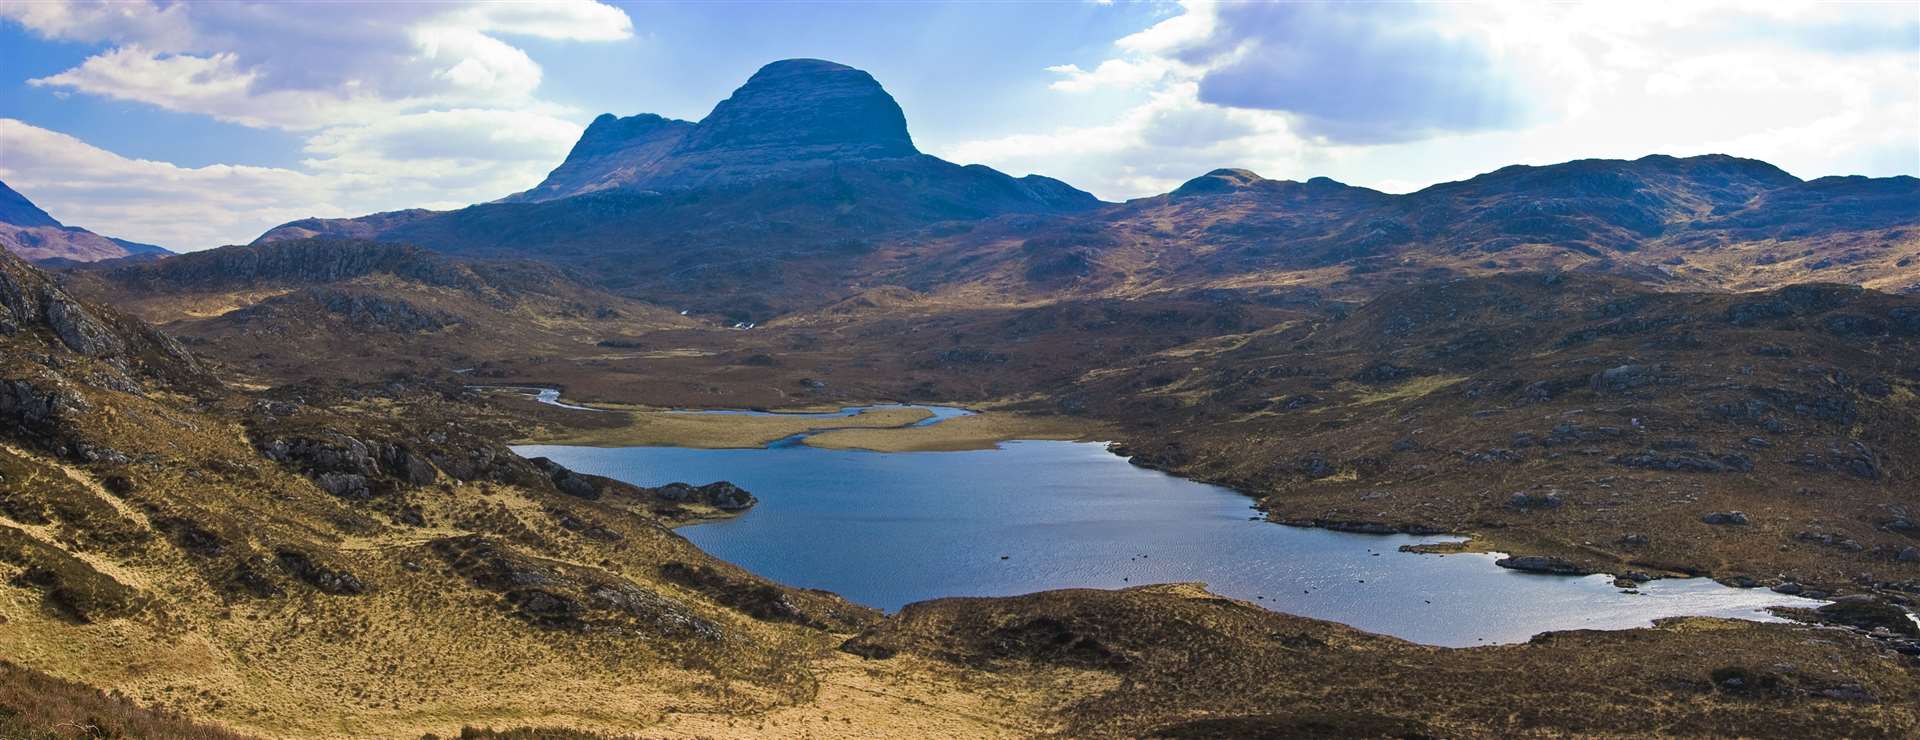 Mount Sulven with a small loch in the foreground in the Asynt region of the western highland of Scotland